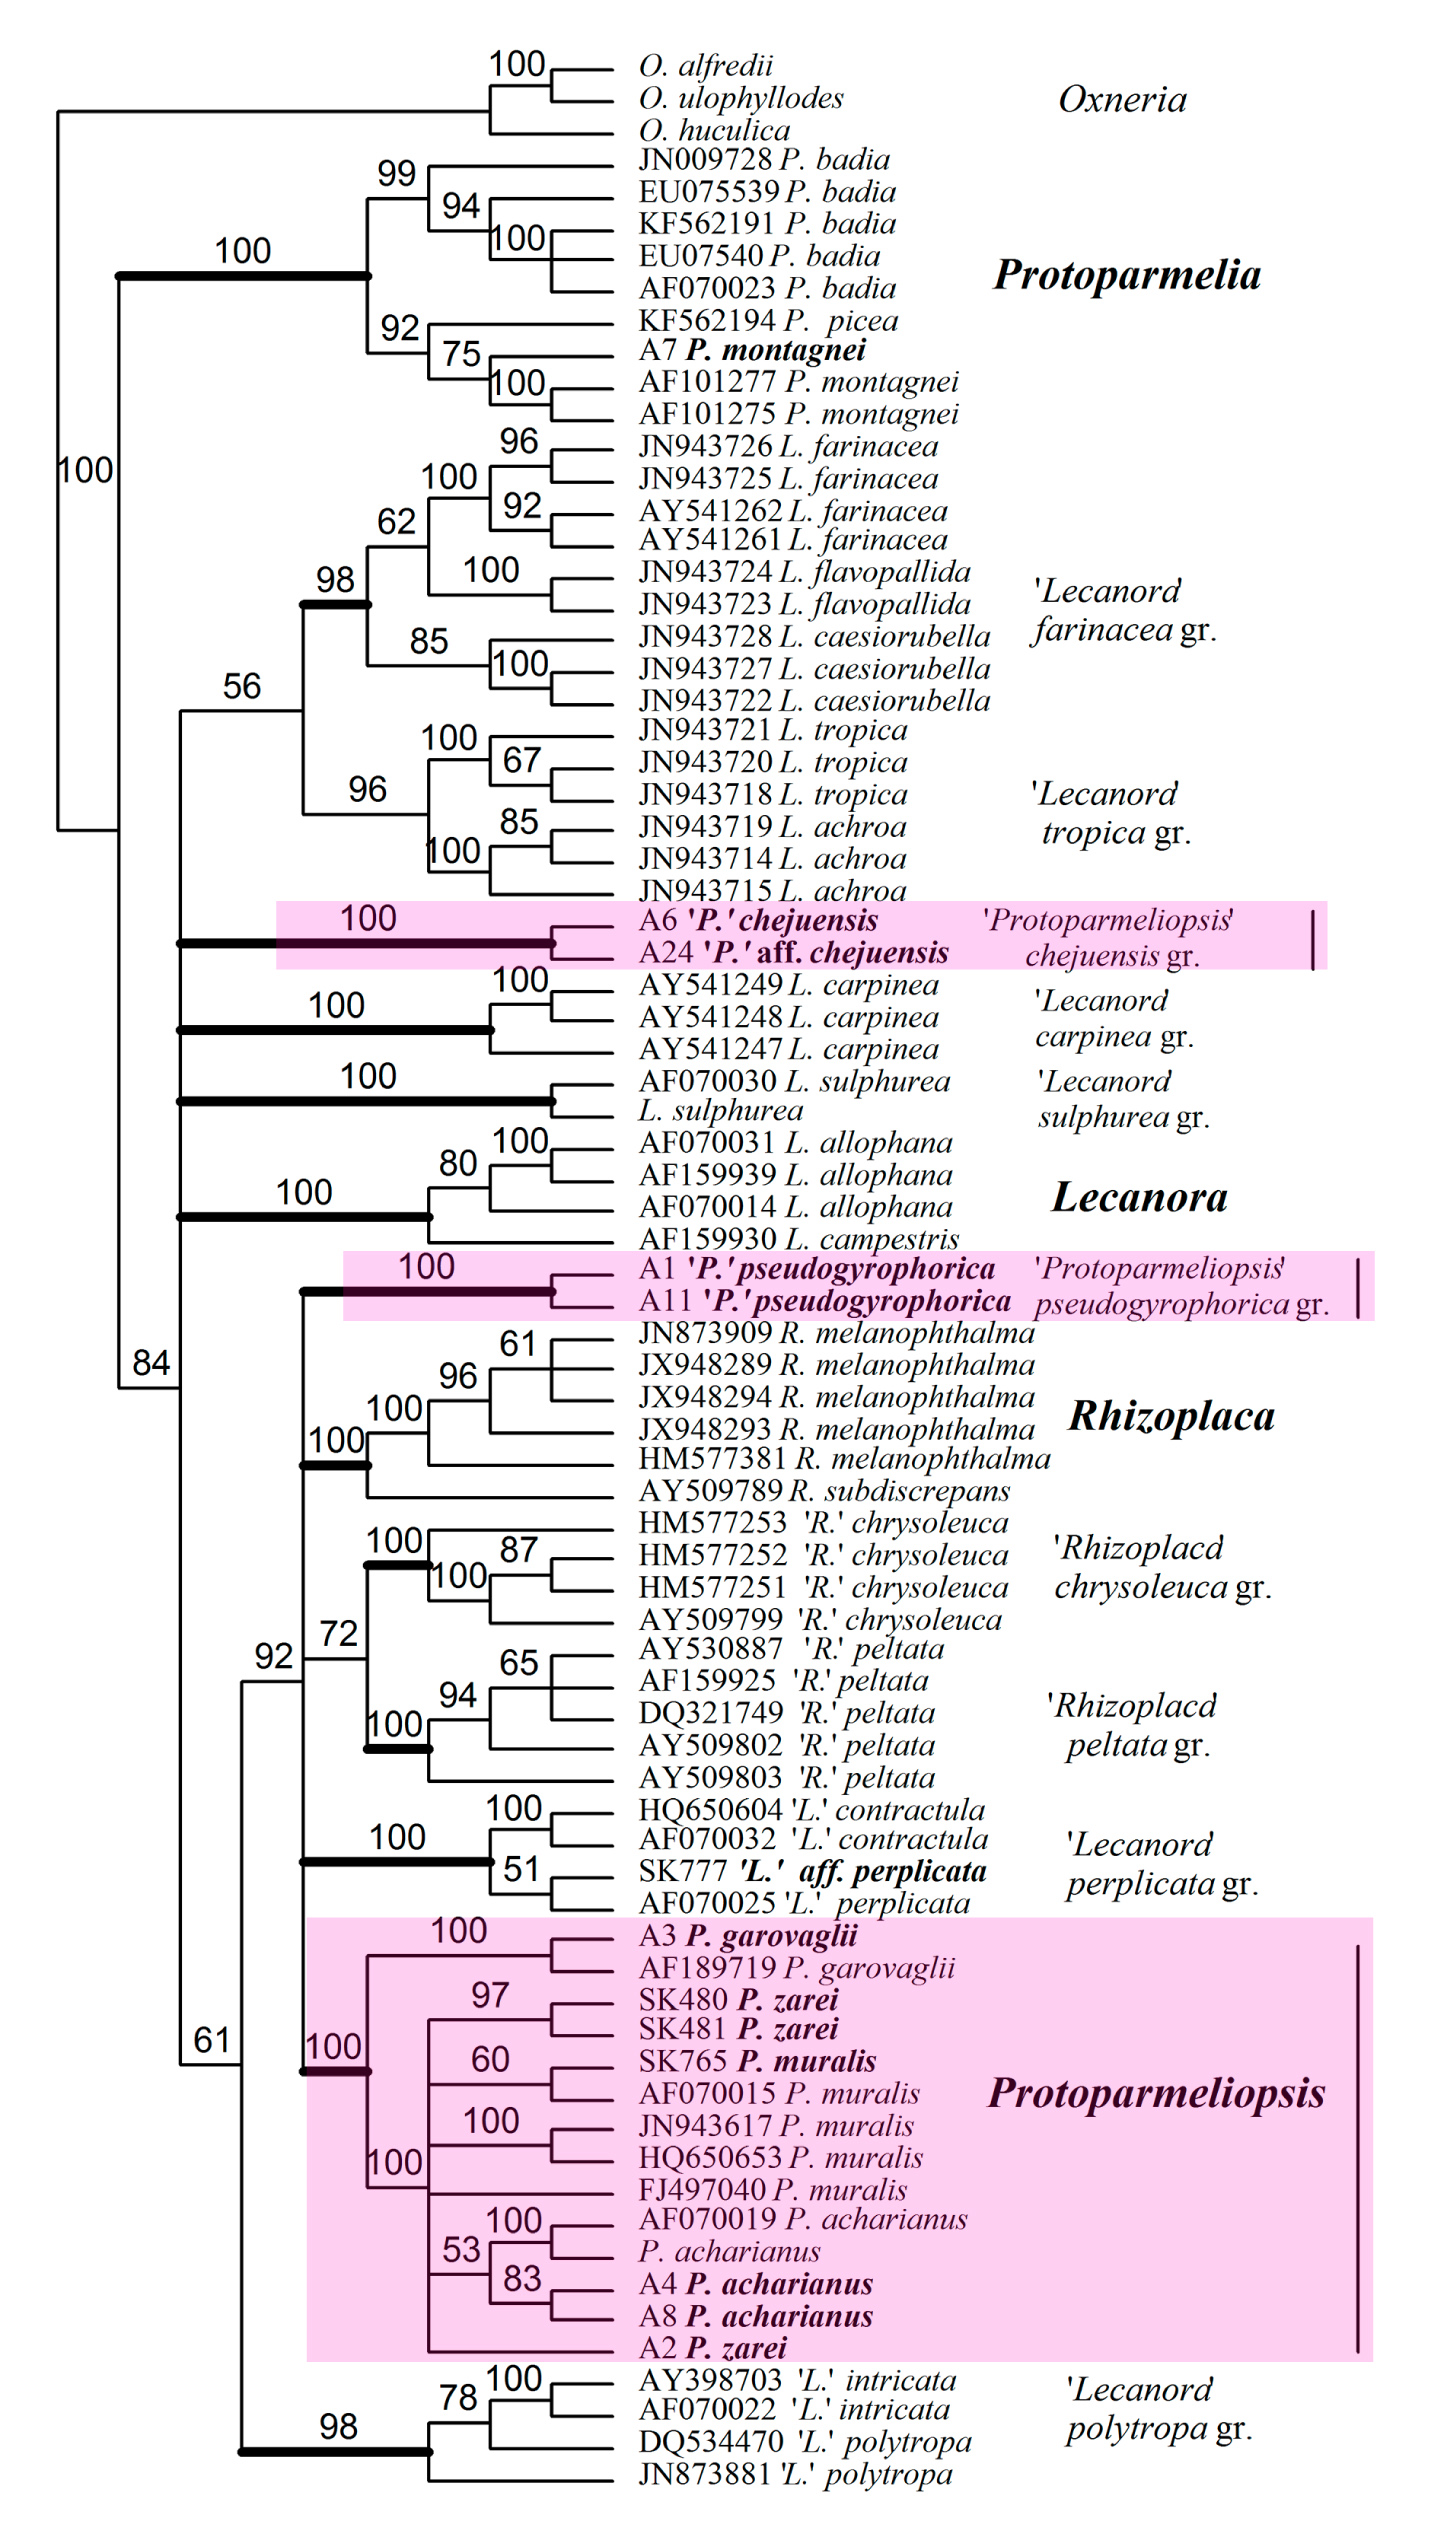 Fig. 1. The phylogenetic tree of the representatives of the family Lecanoraceae including genera Protoparmeliopsis, Lecanora, Rhizoplaca and Protoparmelia based on combined molecular data set.